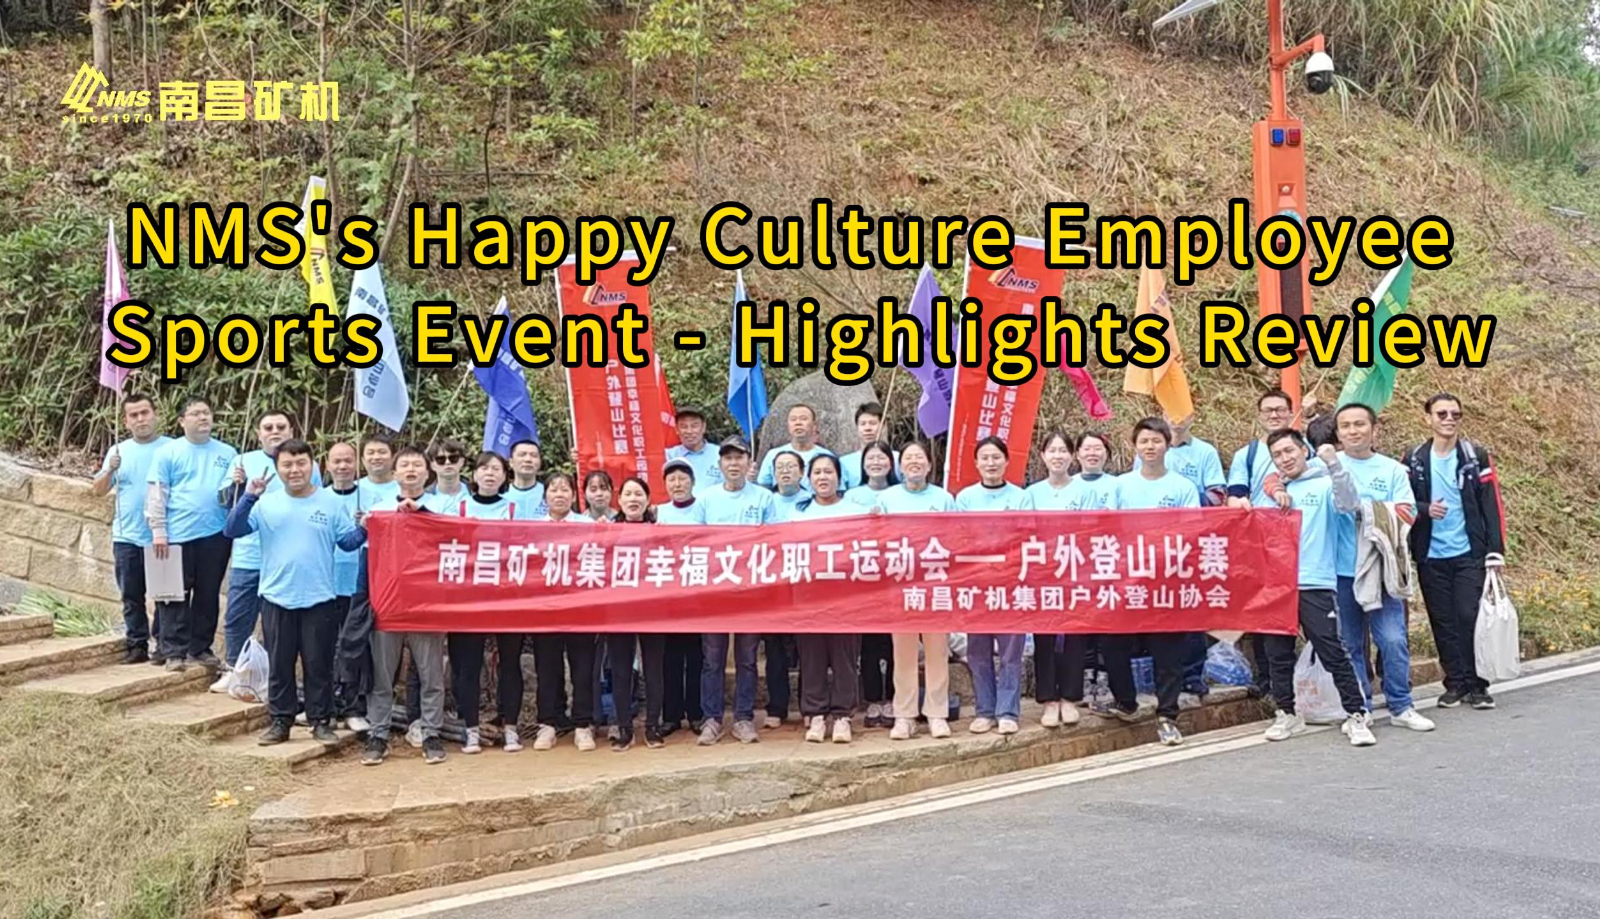 NMS's Happy Culture Employee Sports Event - Highlights Review